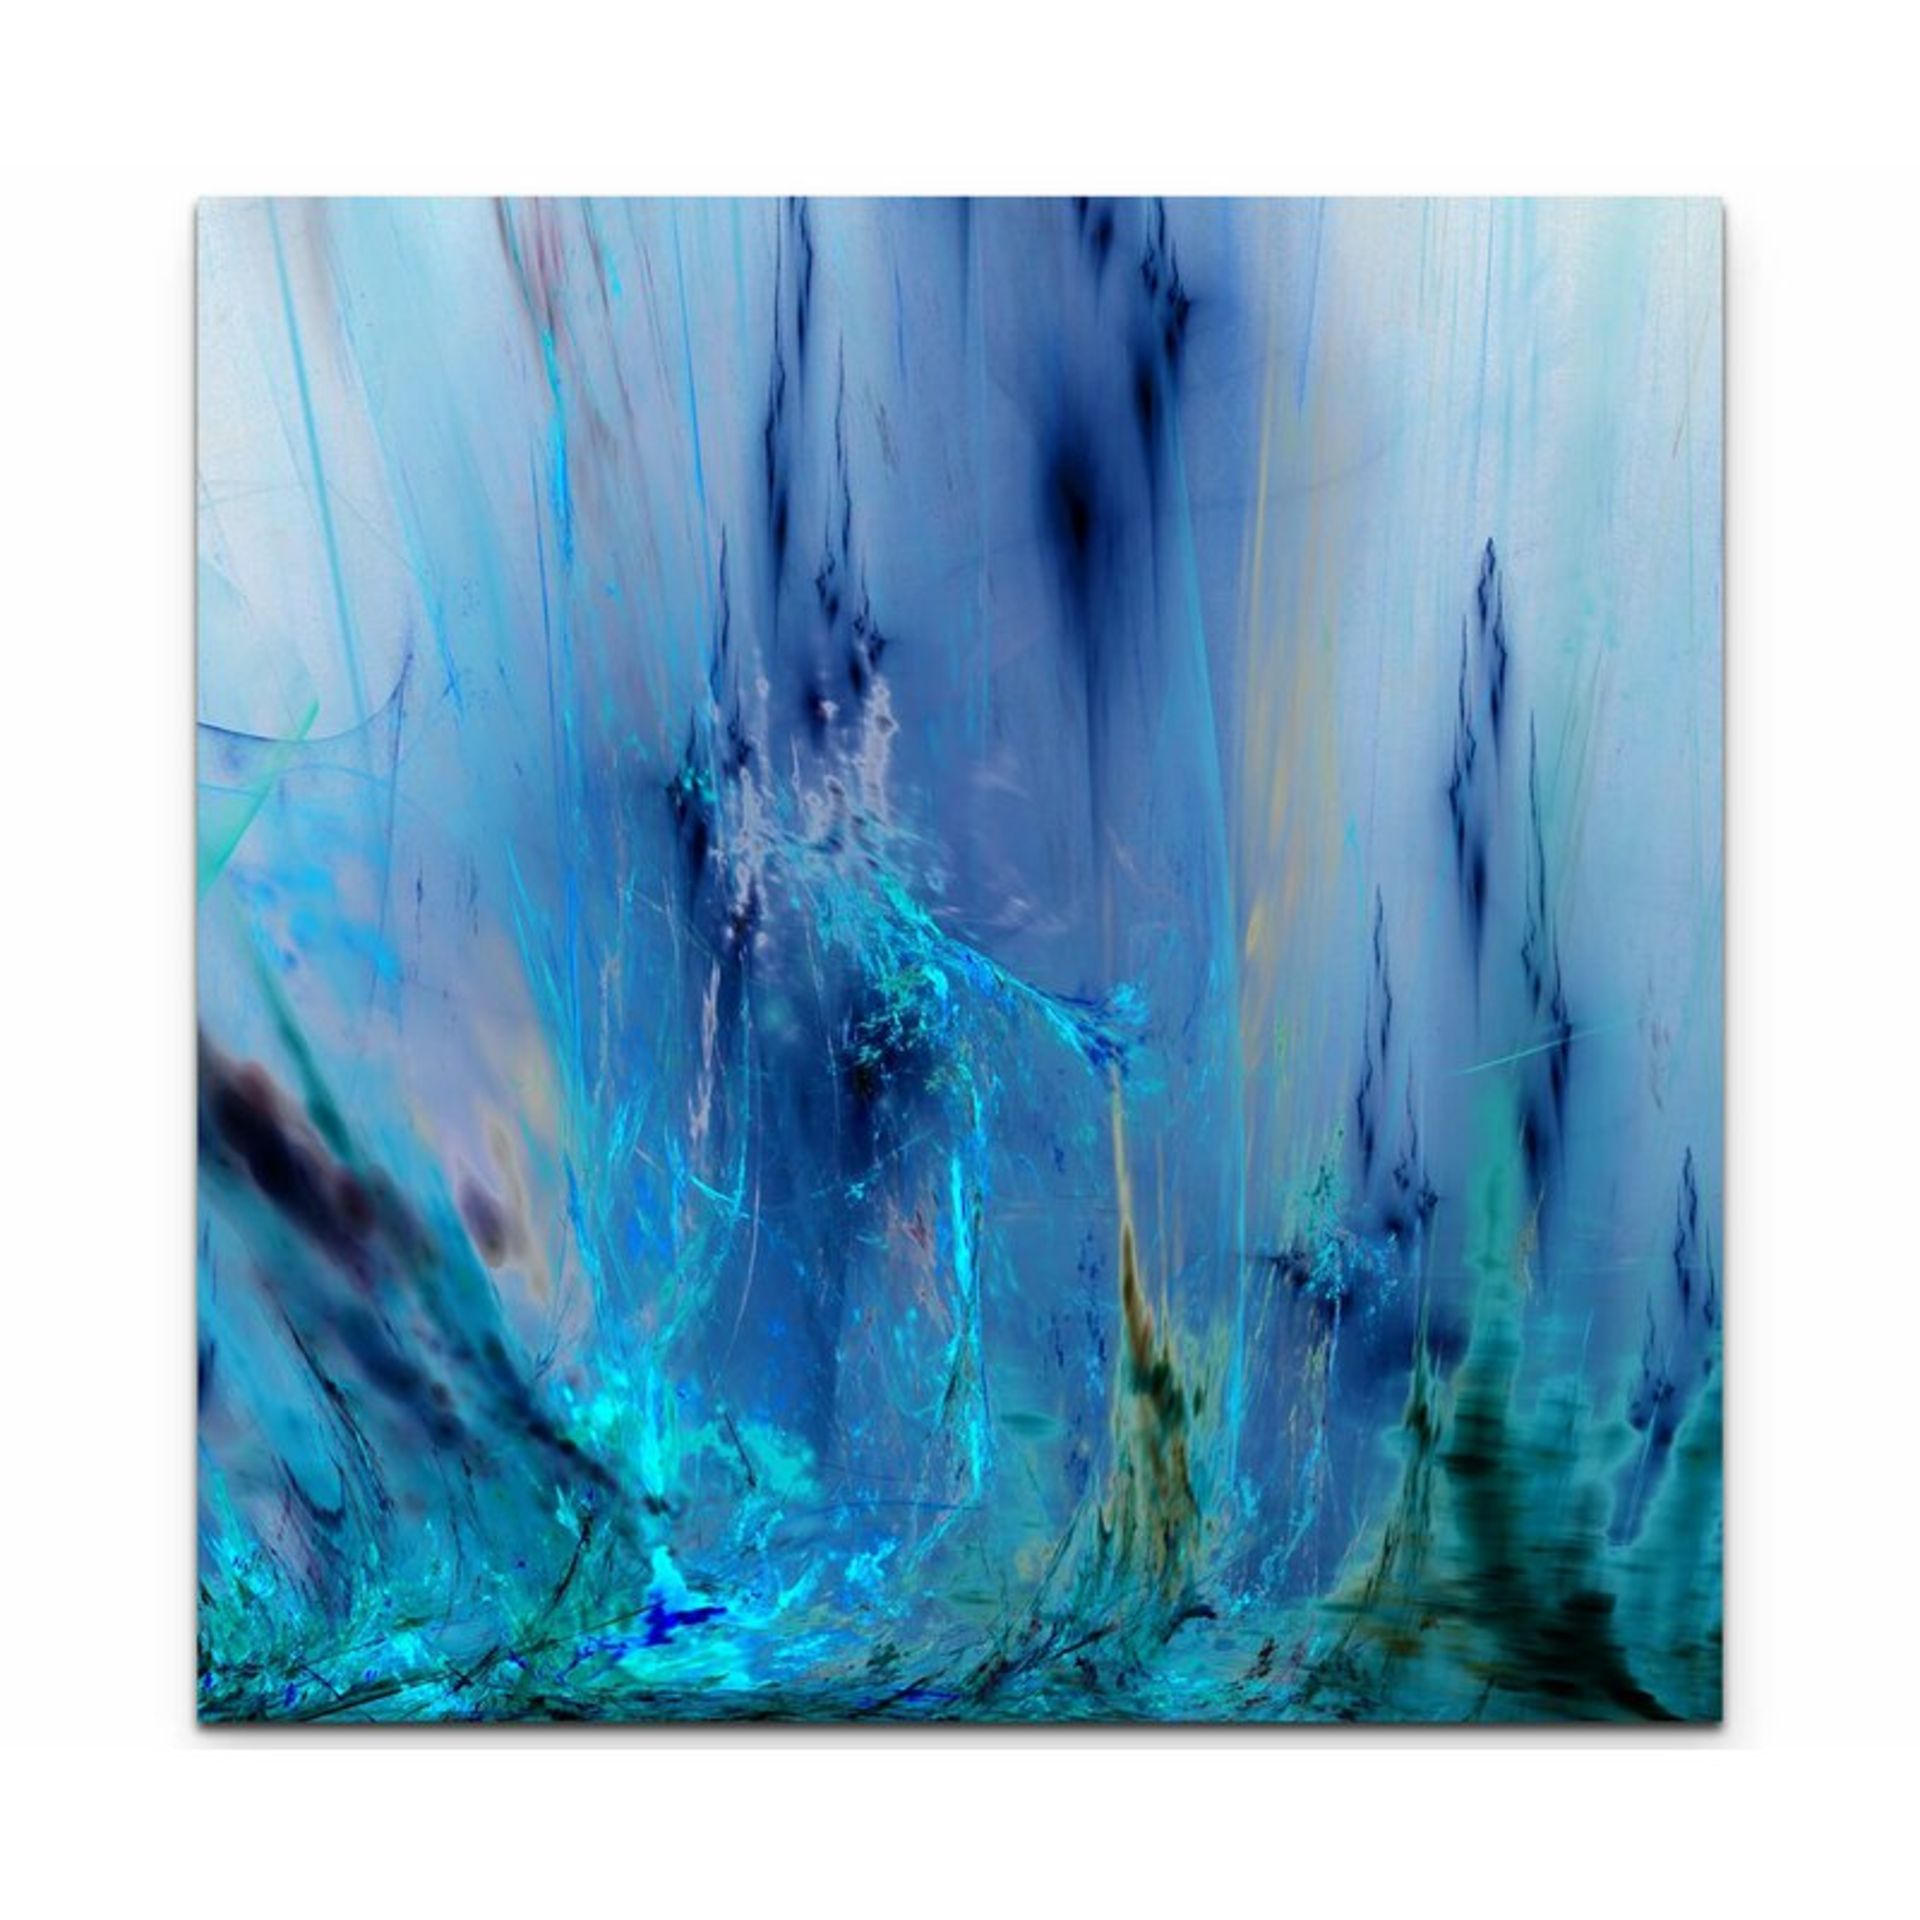 Abstract Stream of Colour Graphic Art Print on Canvas - RRP £49.99 - Image 2 of 2